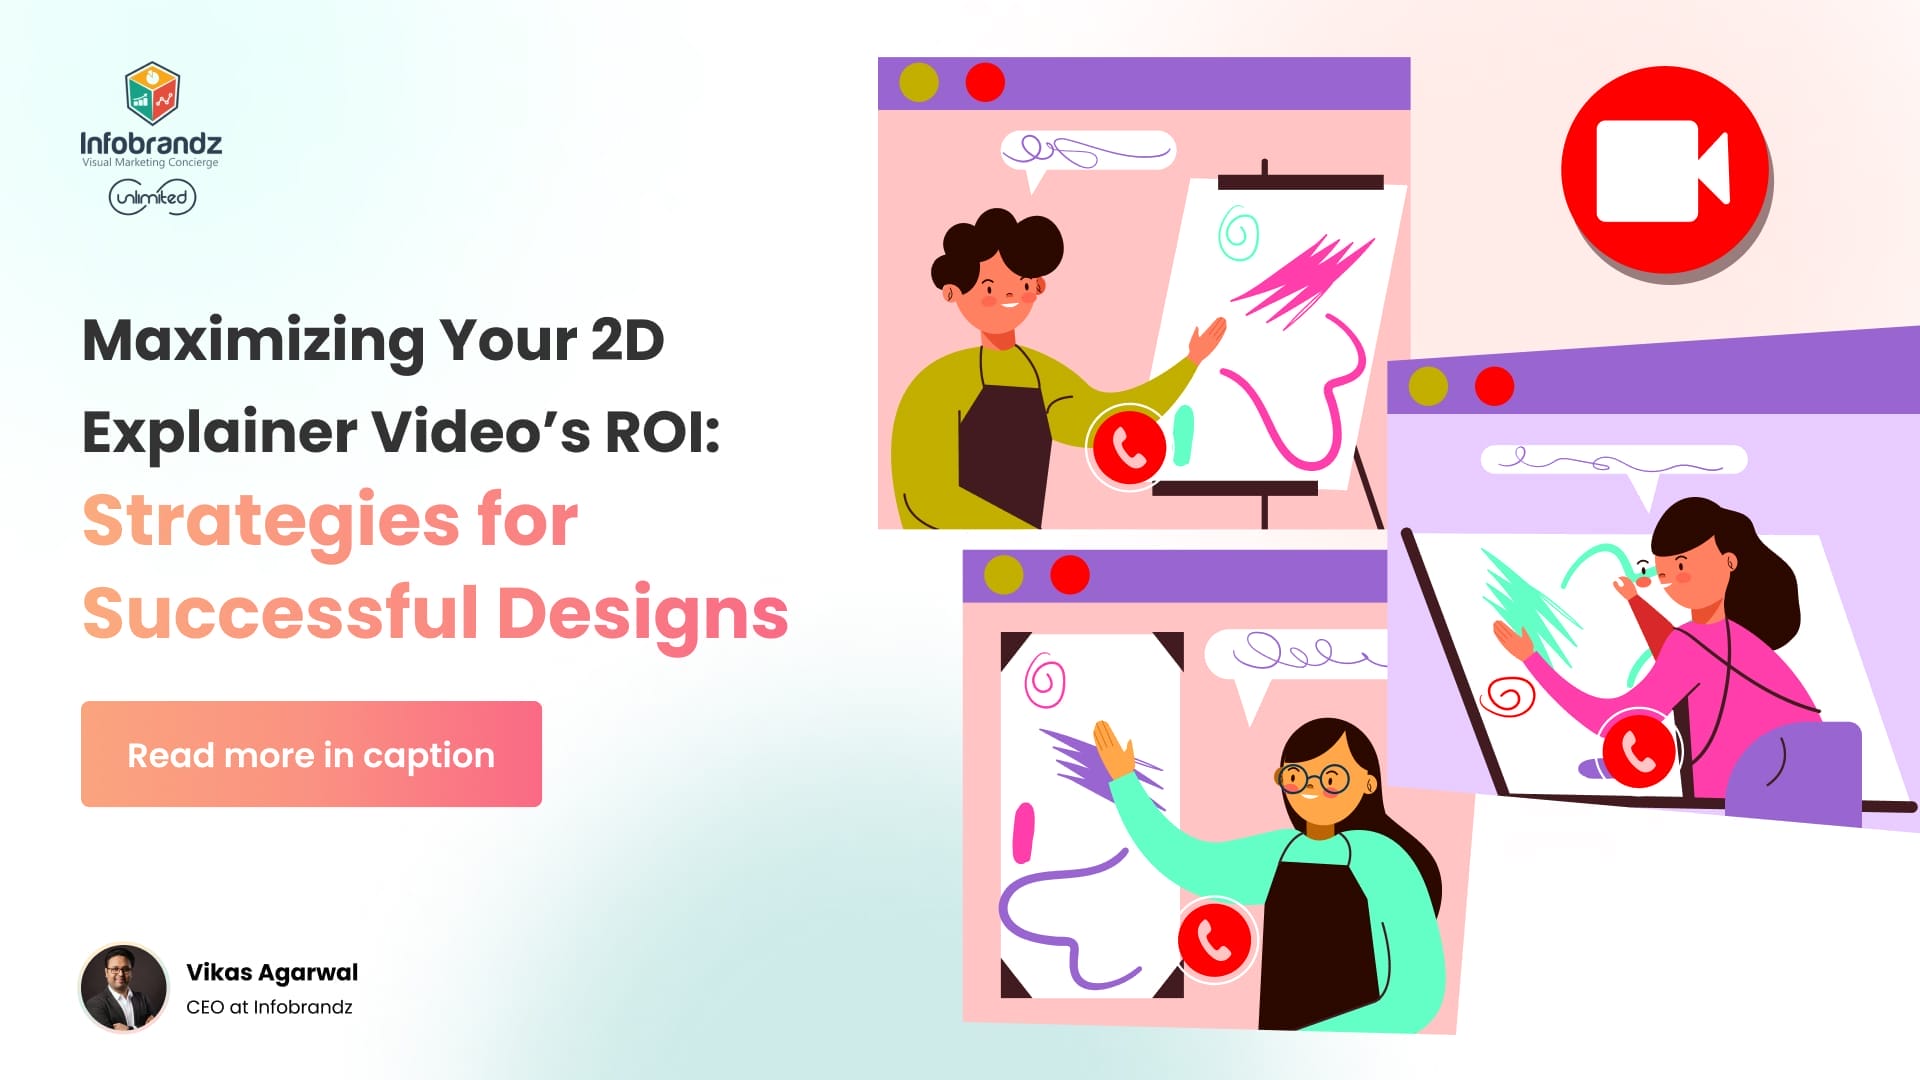 Maximizing Your 2D Explainer Video’s ROI: Strategies for Successful Designs